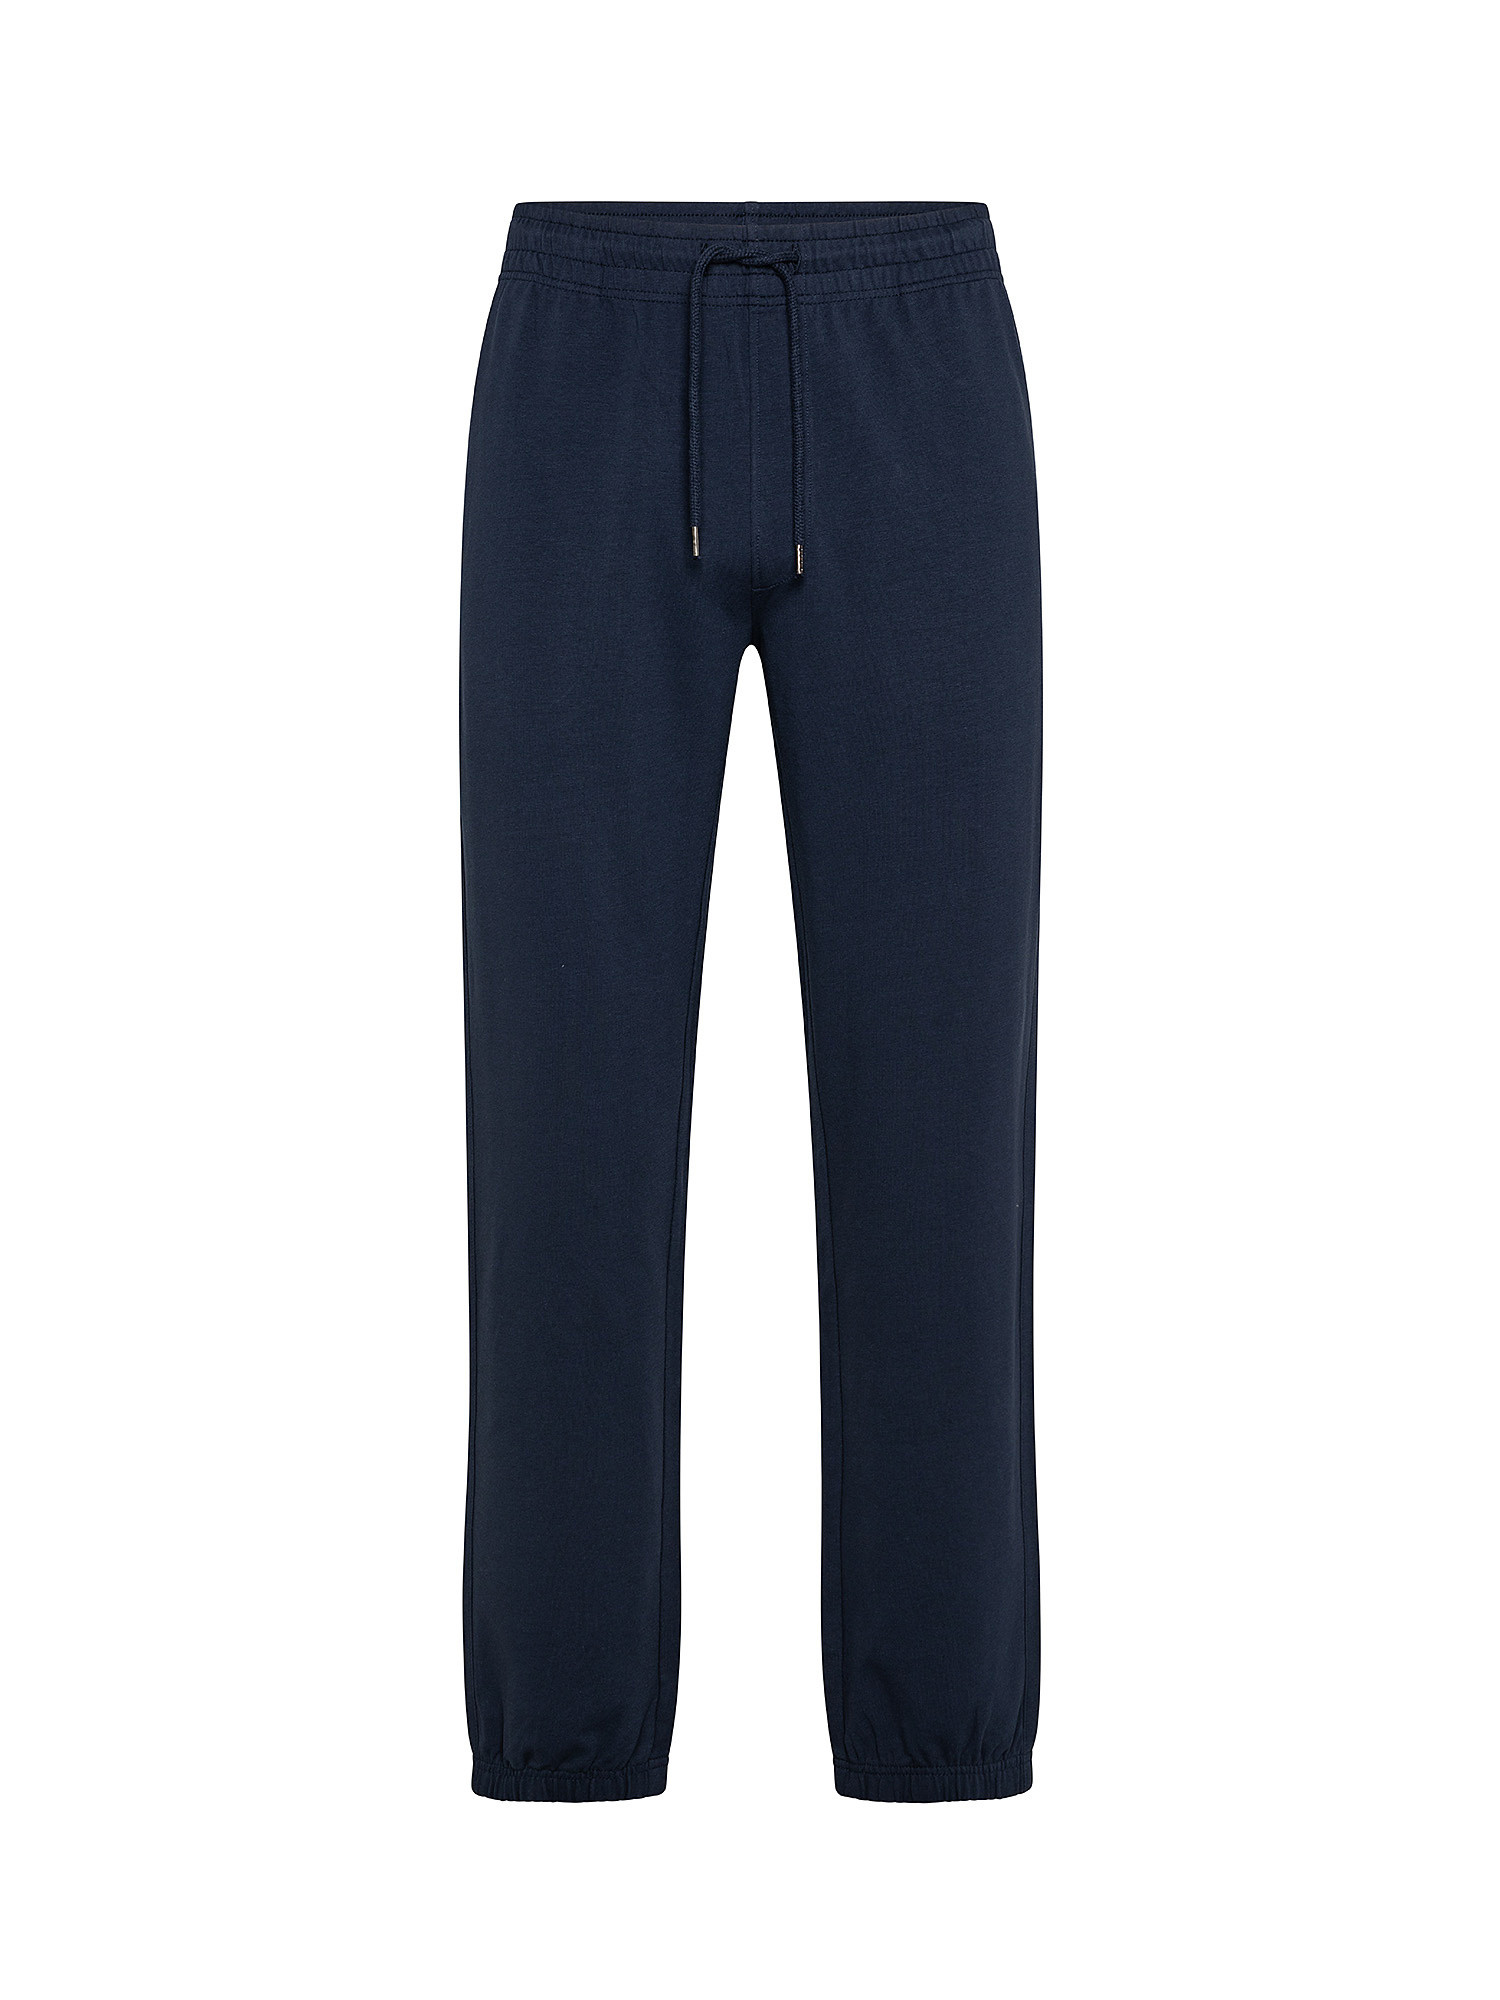 Fleece trousers, Blue, large image number 0